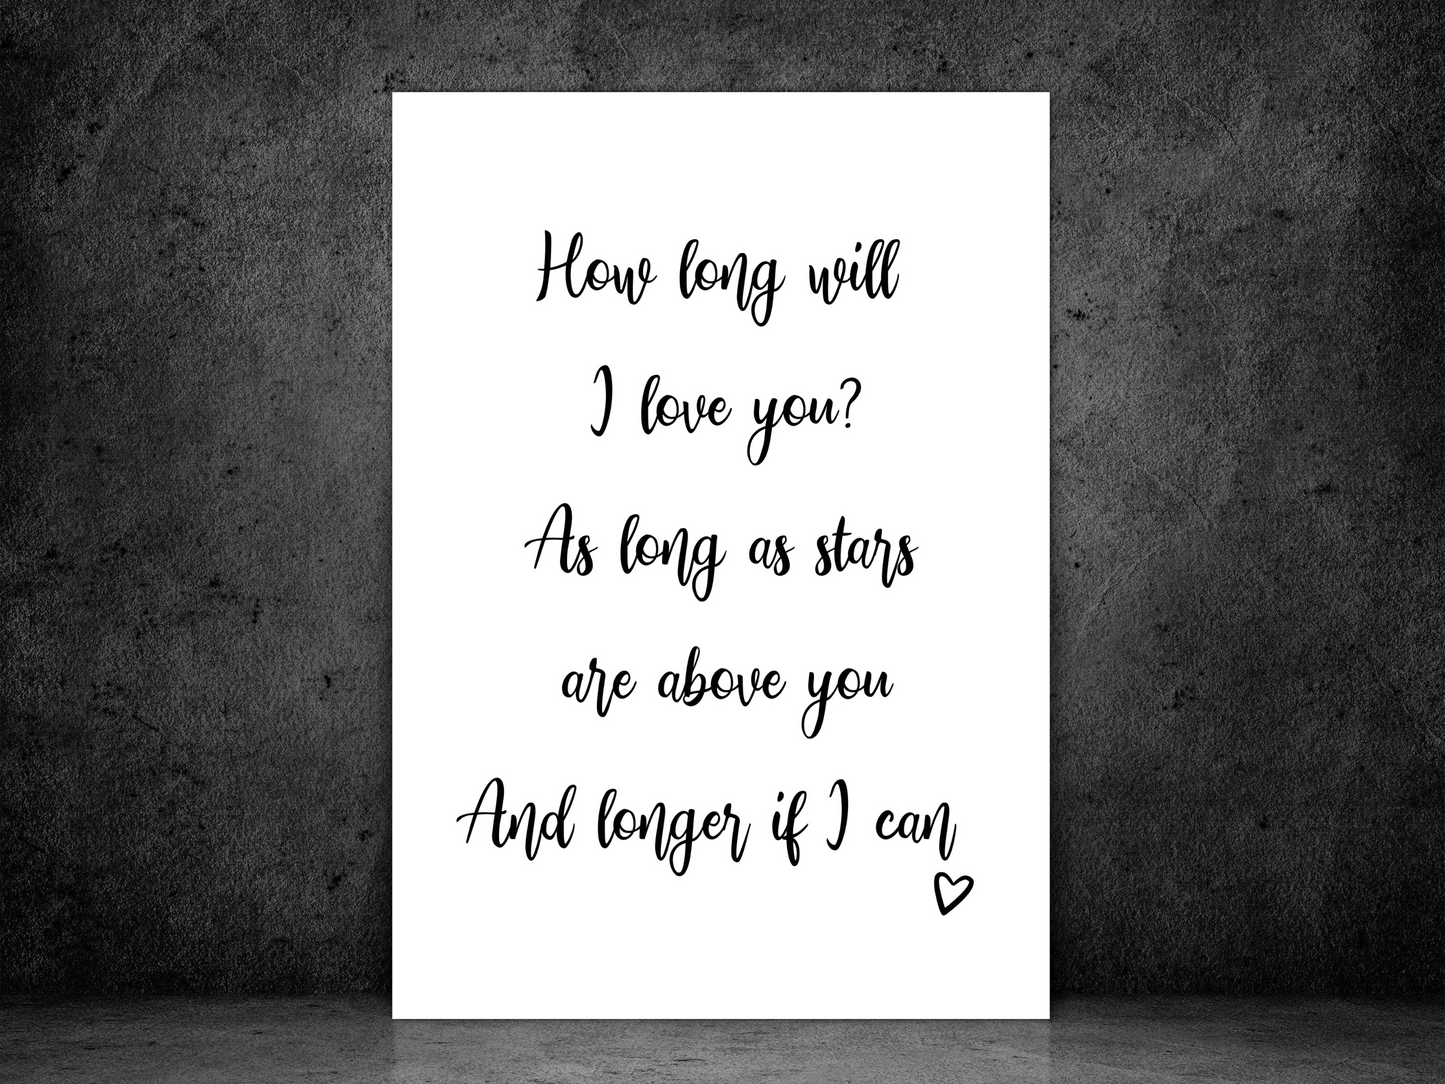 How long will I love you?